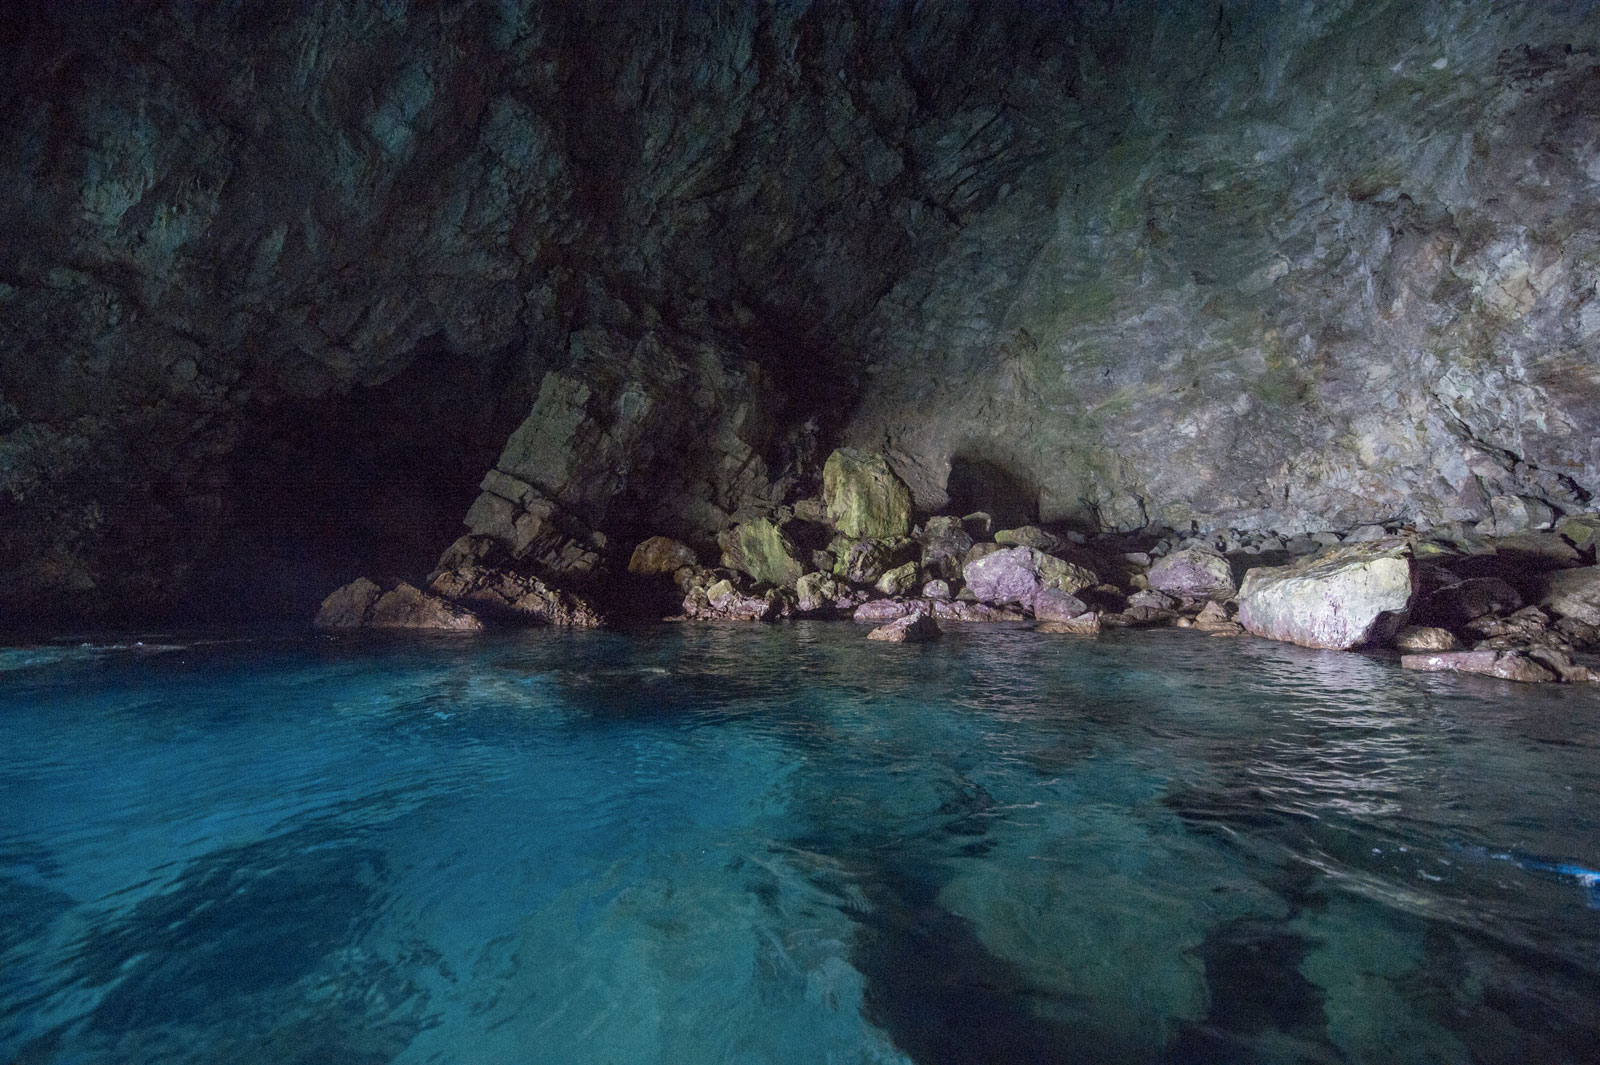 Holidays in the Amalfi Coast: visit the Suppraiano cave!